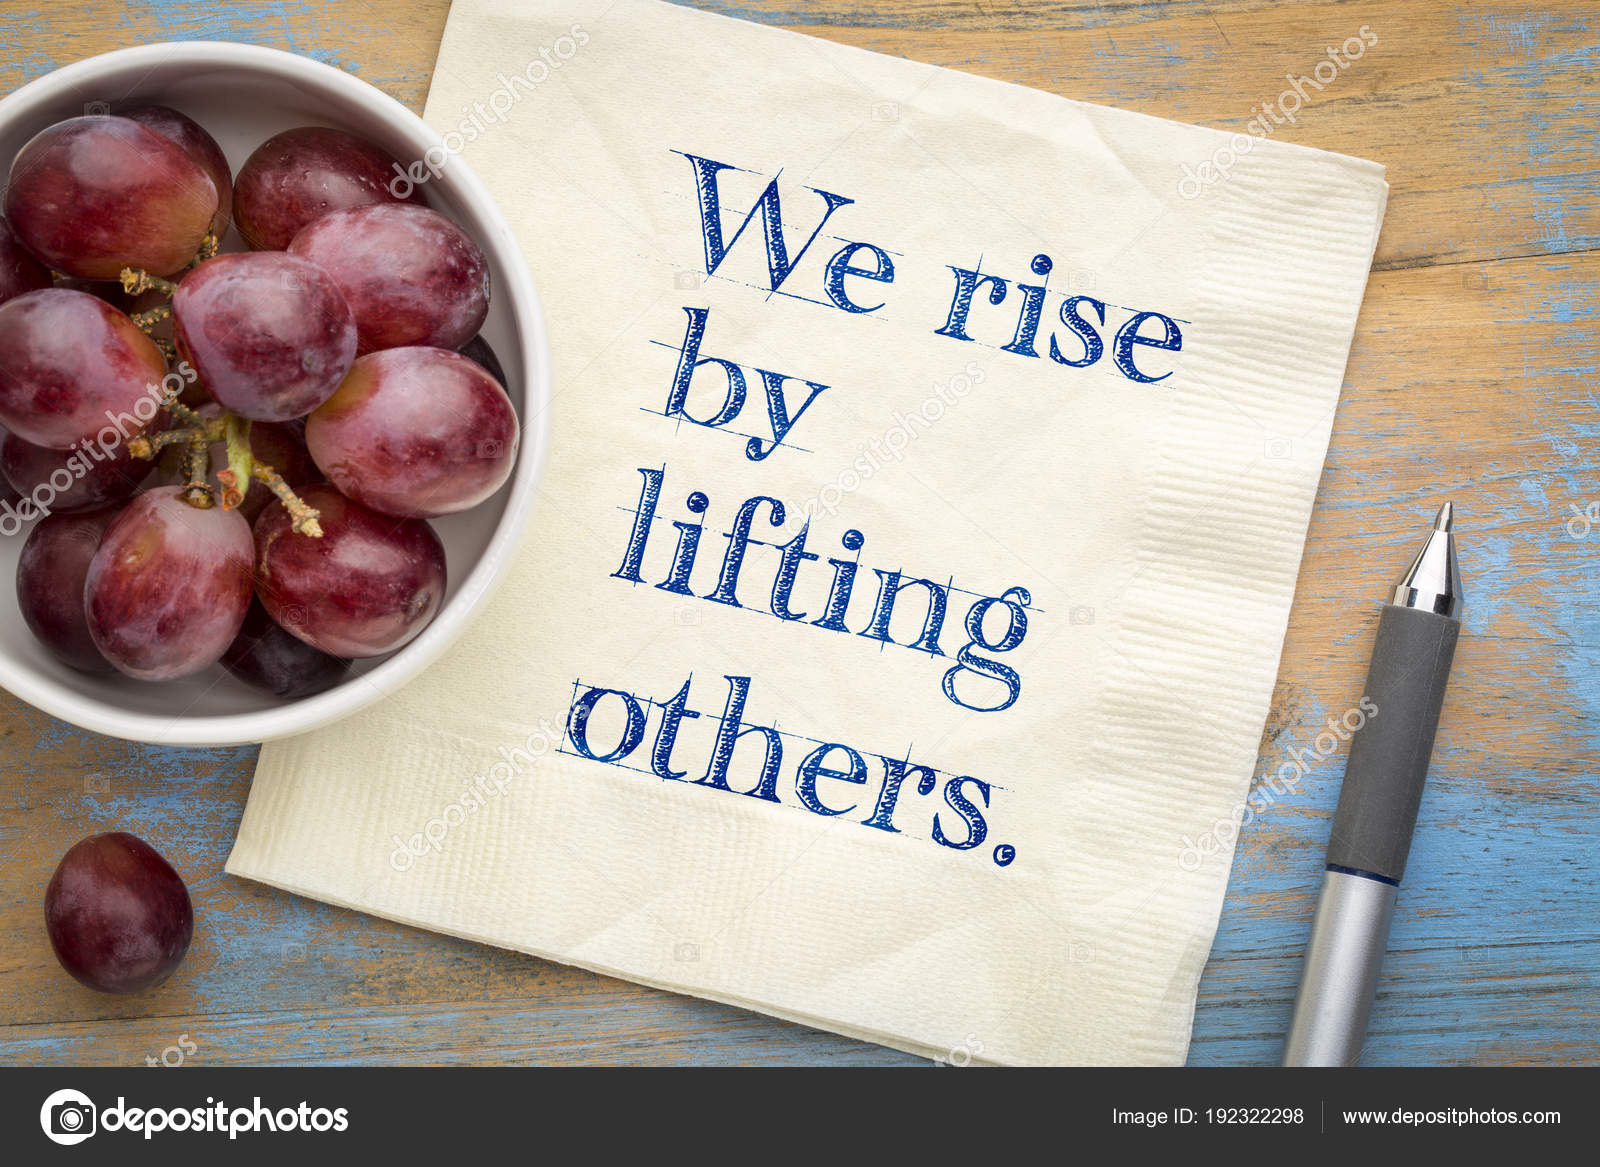 We Rise By Lifting Others Wisdom Quote On Napkin Stock Photo Image By C Pixelsaway 192322298